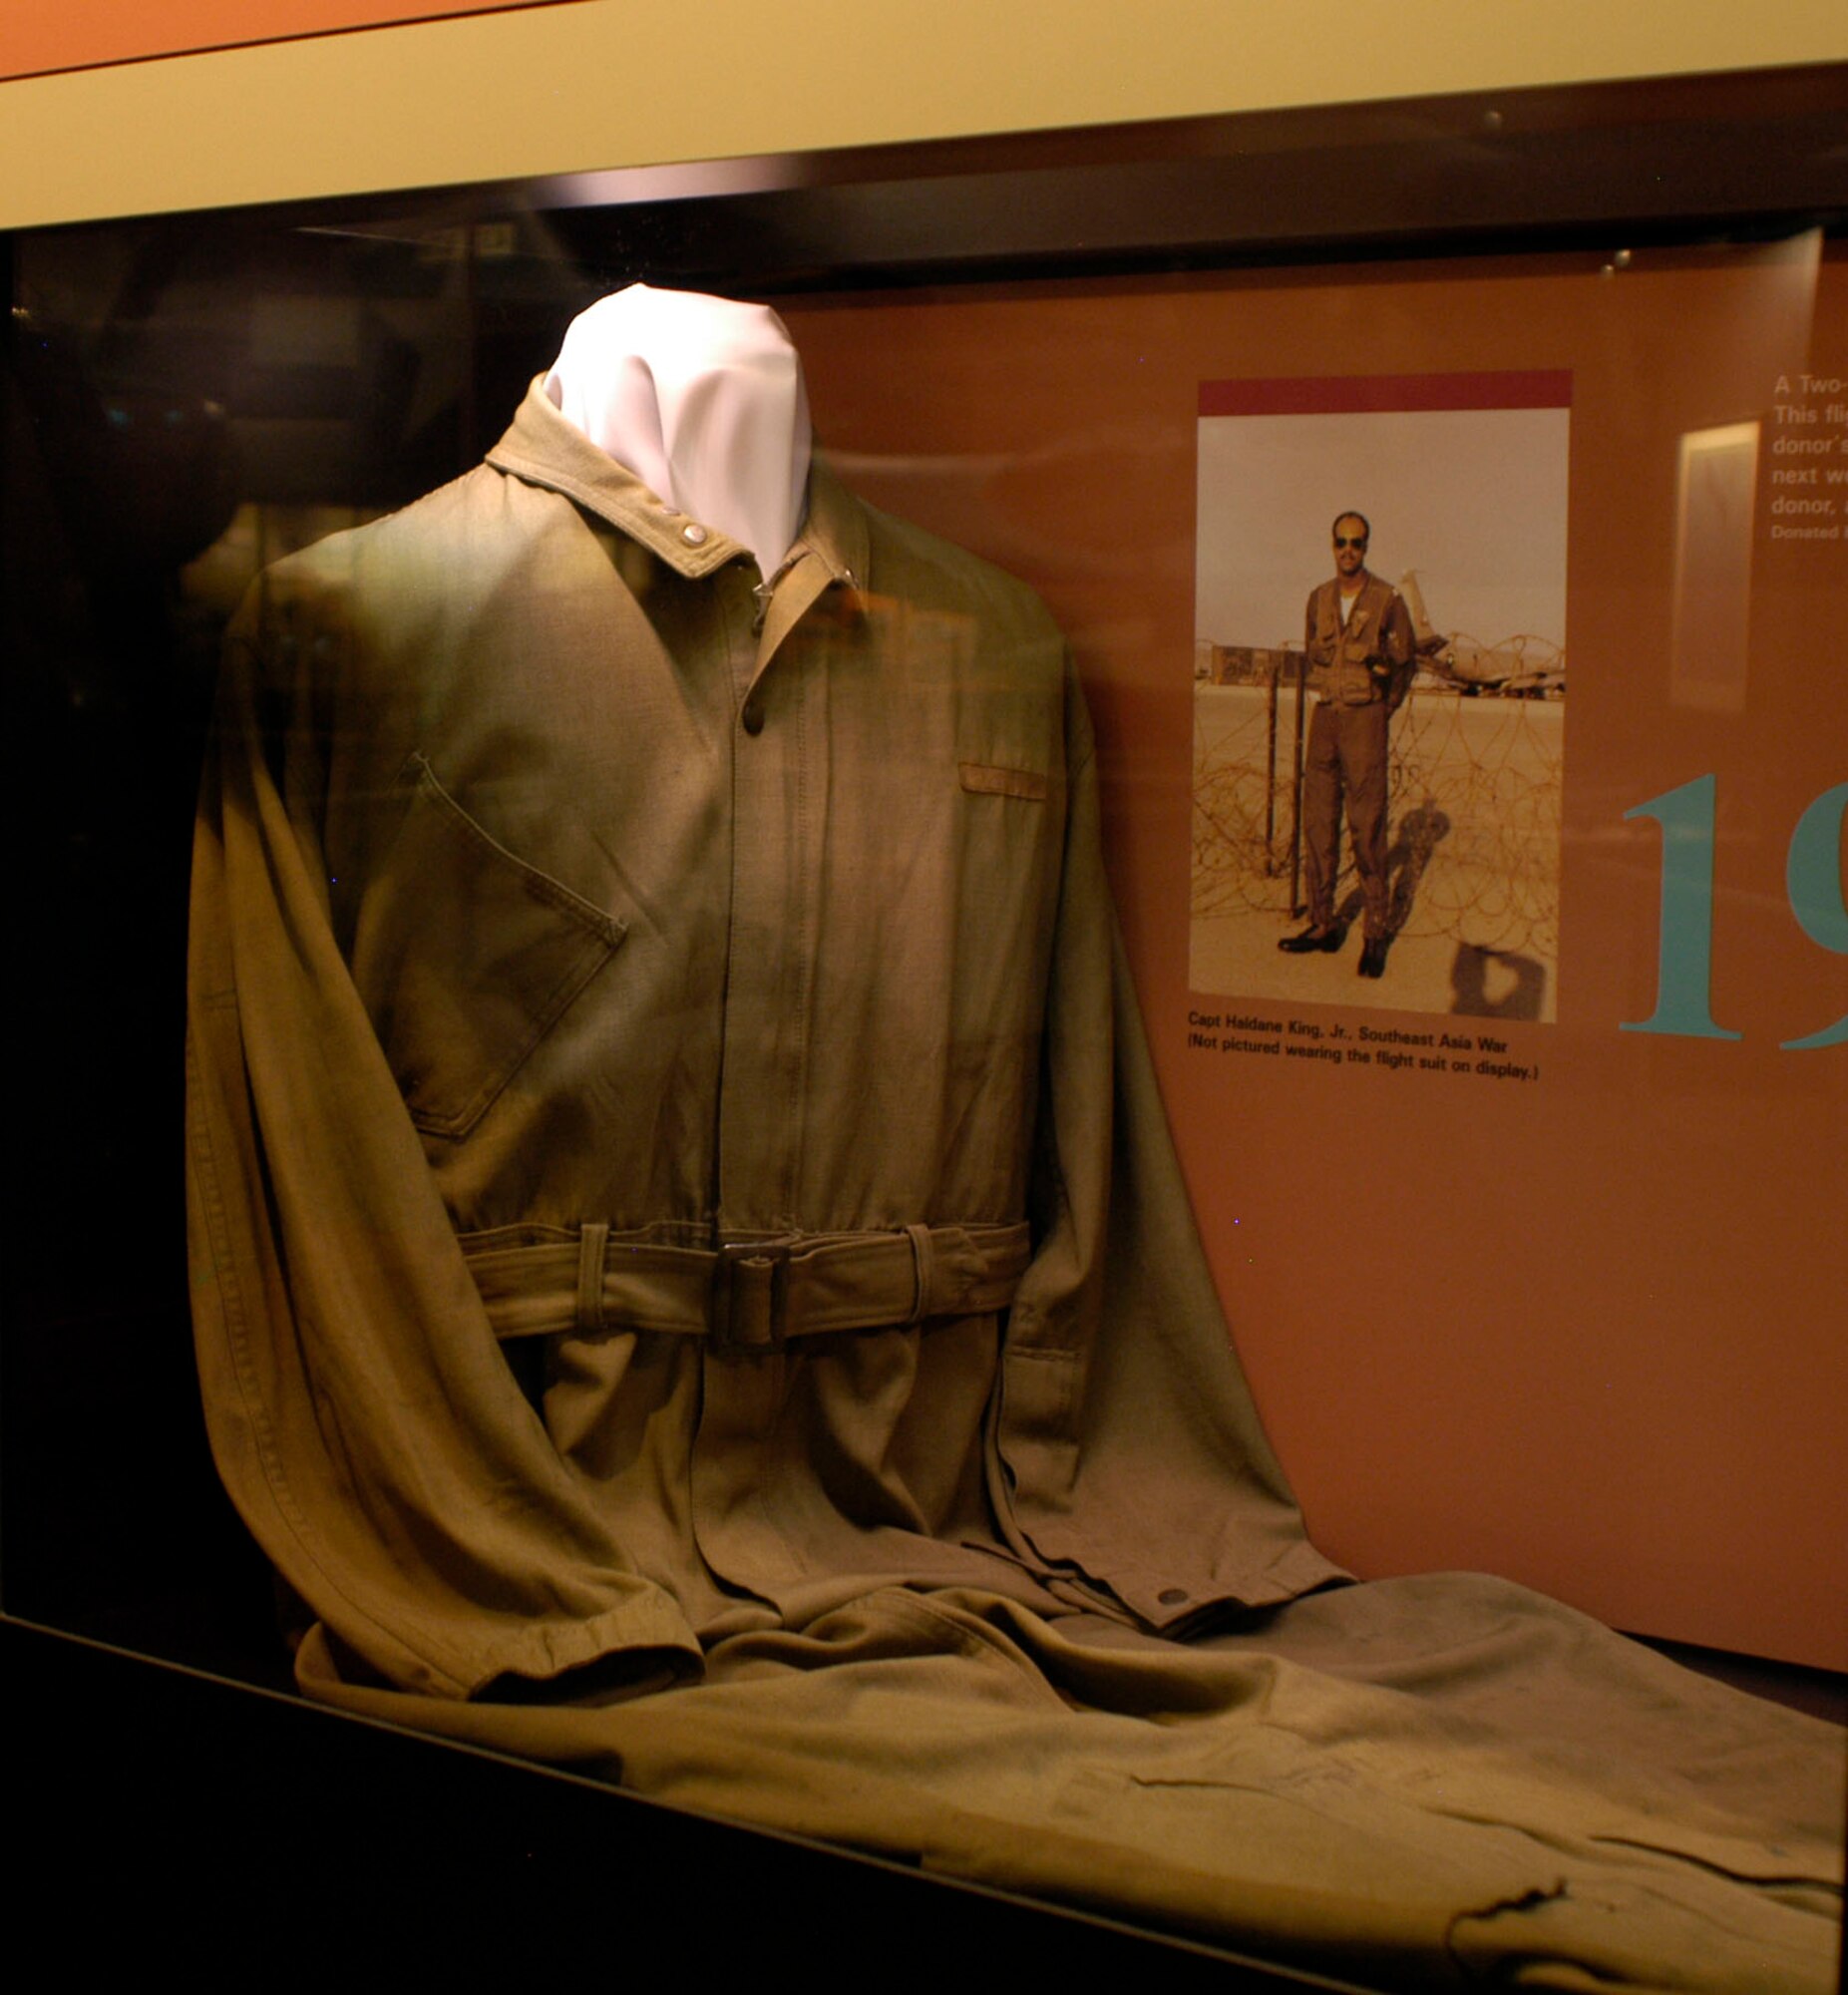 DAYTON, Ohio - A two-war flight suit on display in the World War II Gallery at the National Museum of the U.S. Air Force. (U.S. Air Force photo)